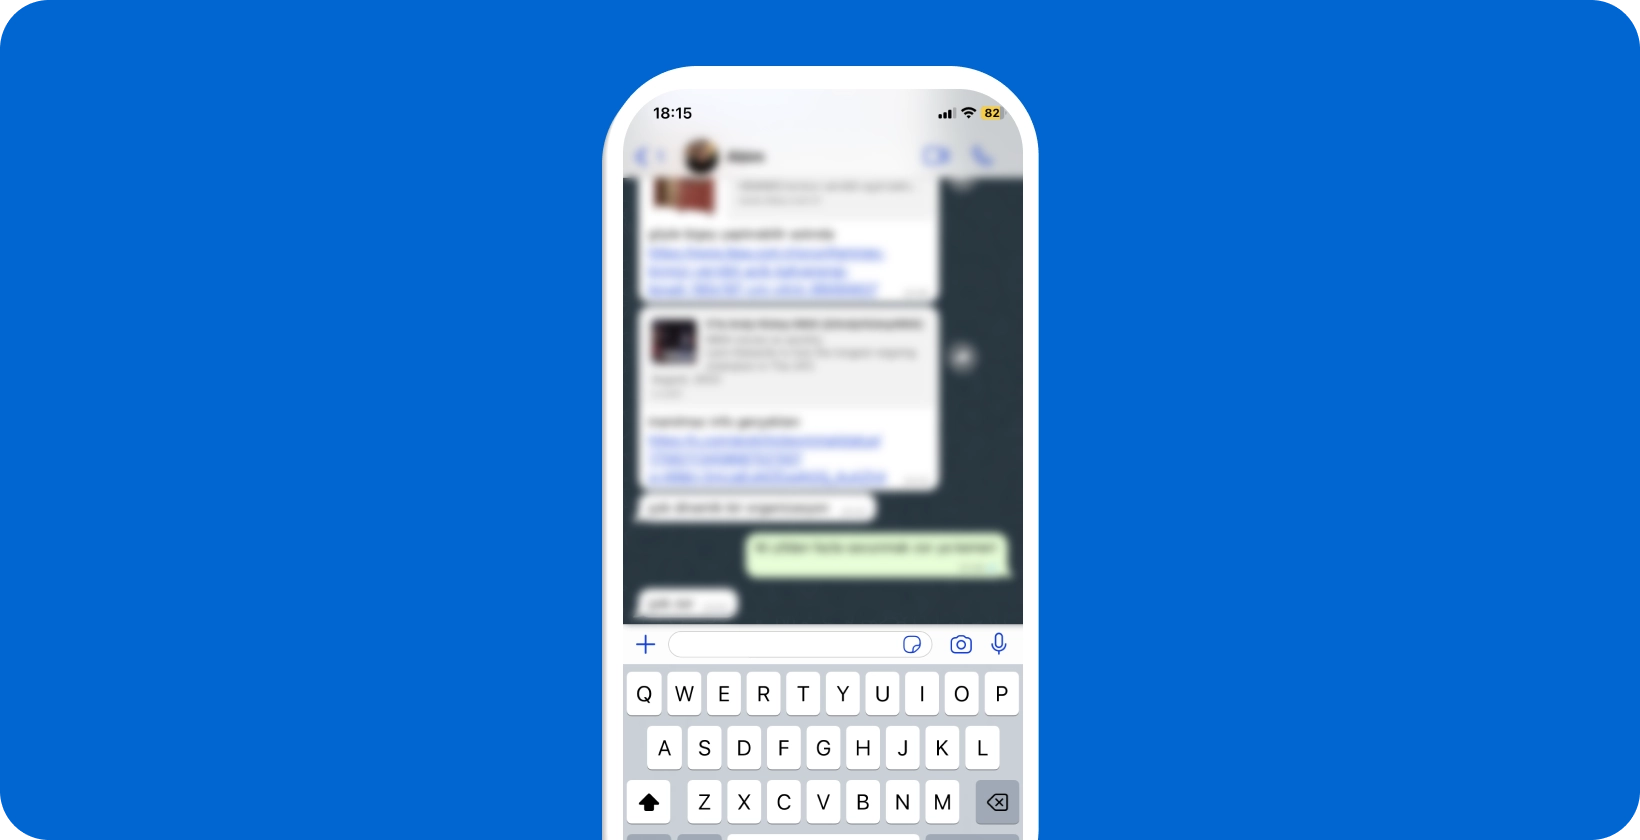 Smartphone displaying an active WhatsApp conversation with the keyboard open, ready for voice dictation.